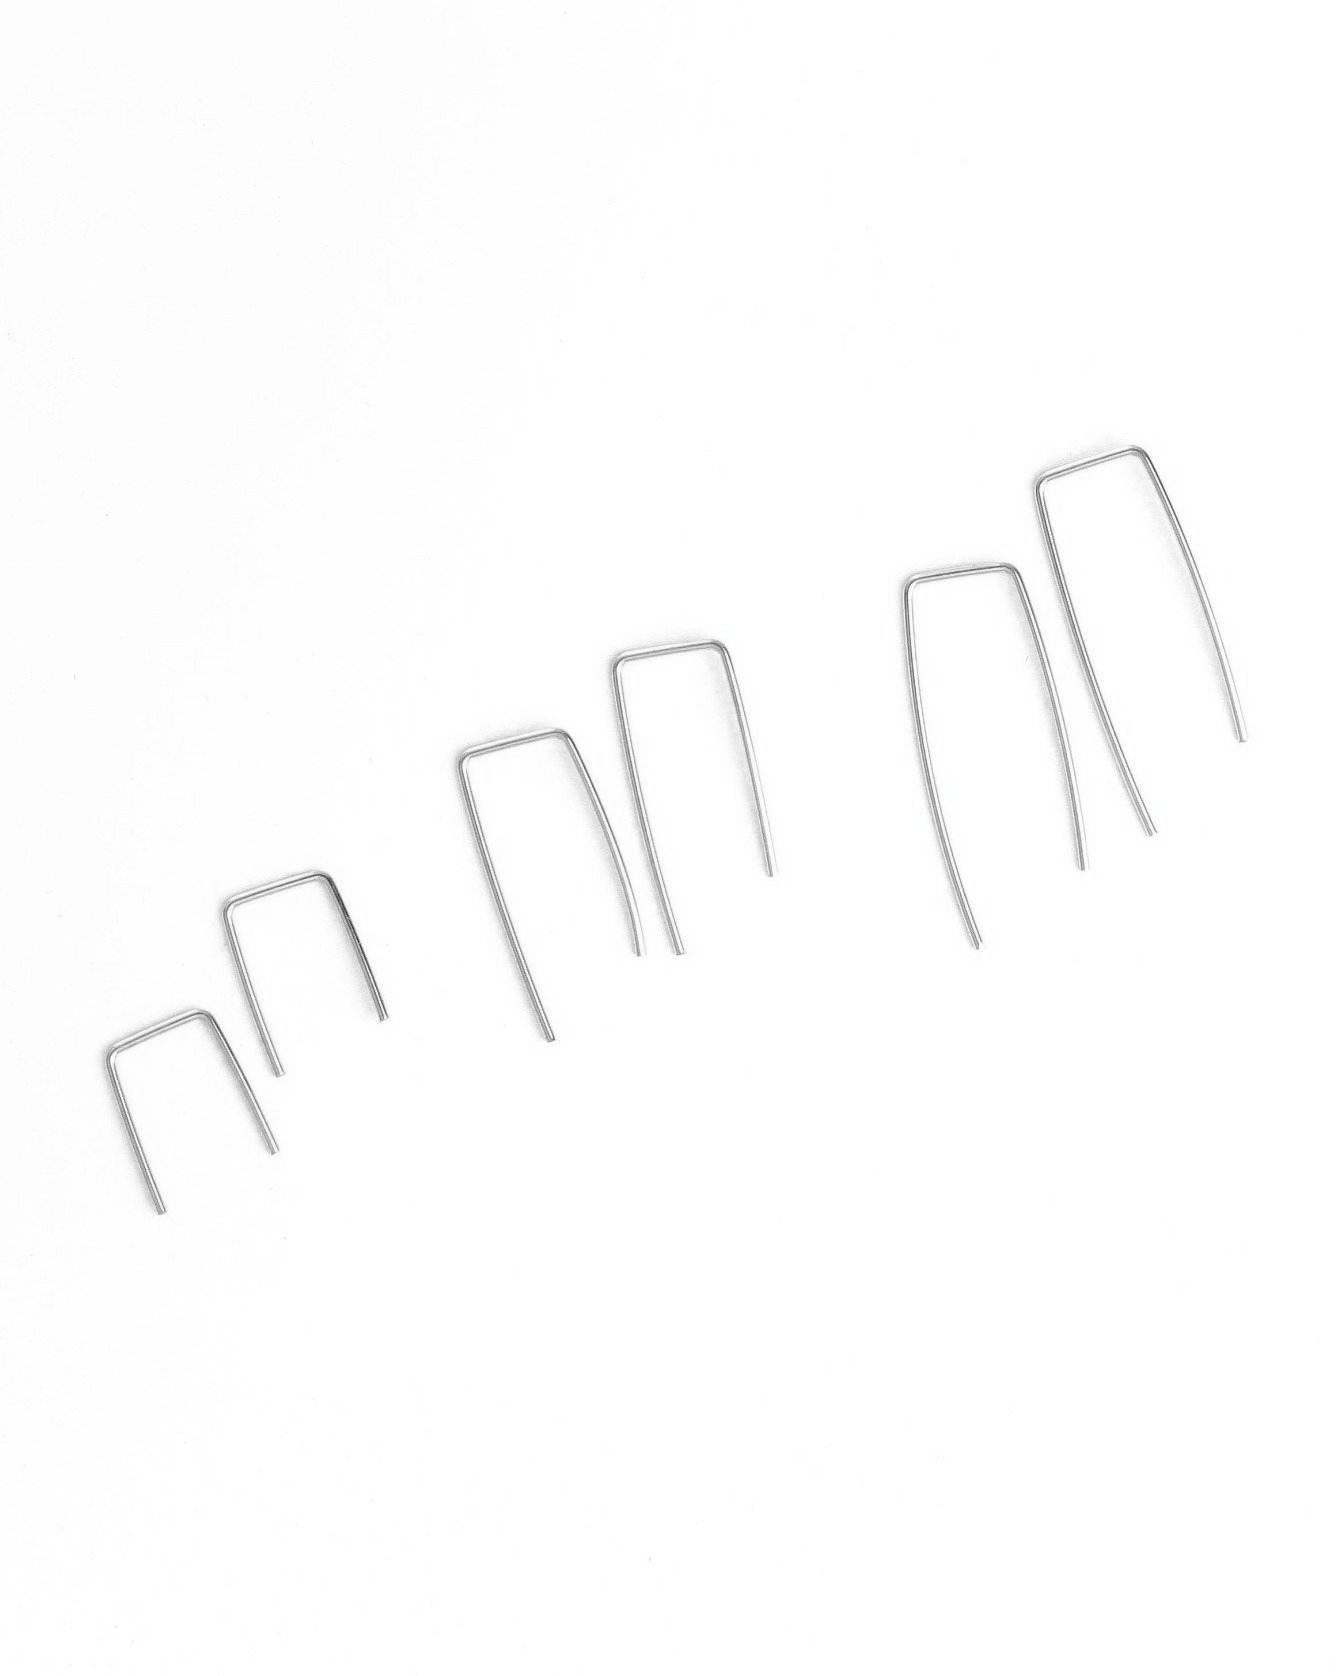 You Earrings by KOZAKH. Hand shaped minimalist bar earrings, crafted in Sterling Silver.